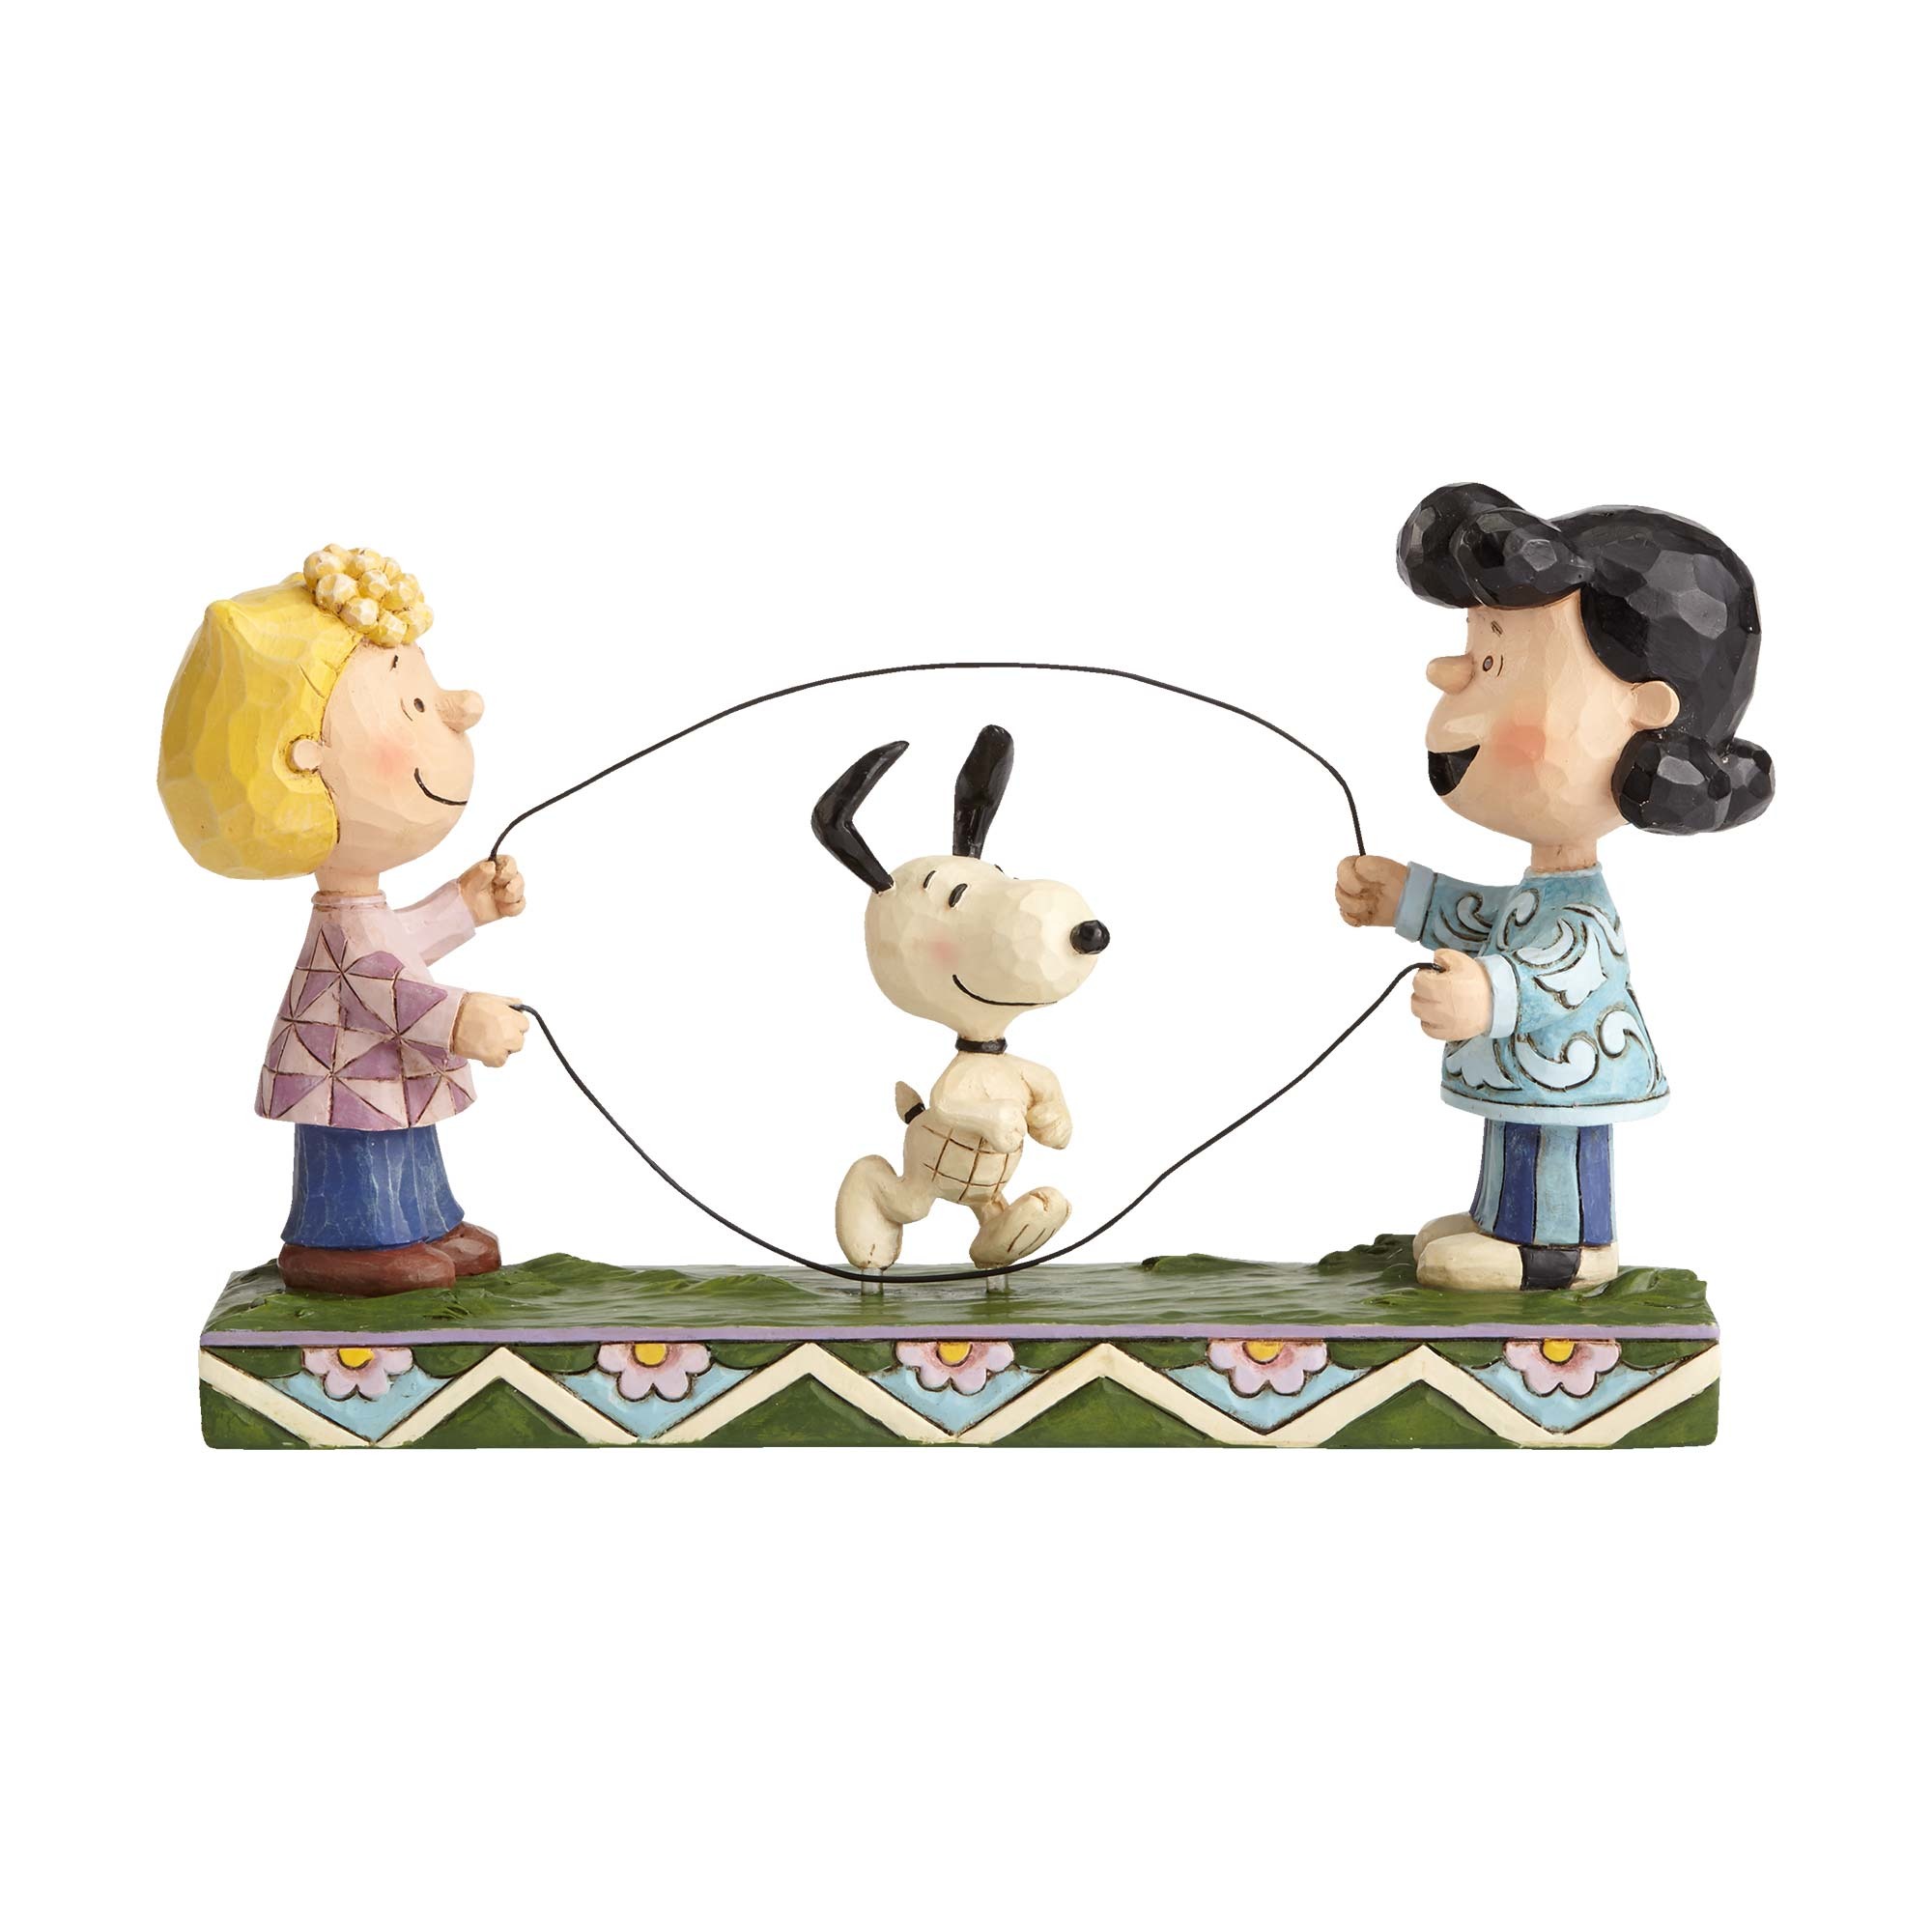 Sally, Lucy and Snoopy Figurine, Double Dutch Dog, Jumping Rope